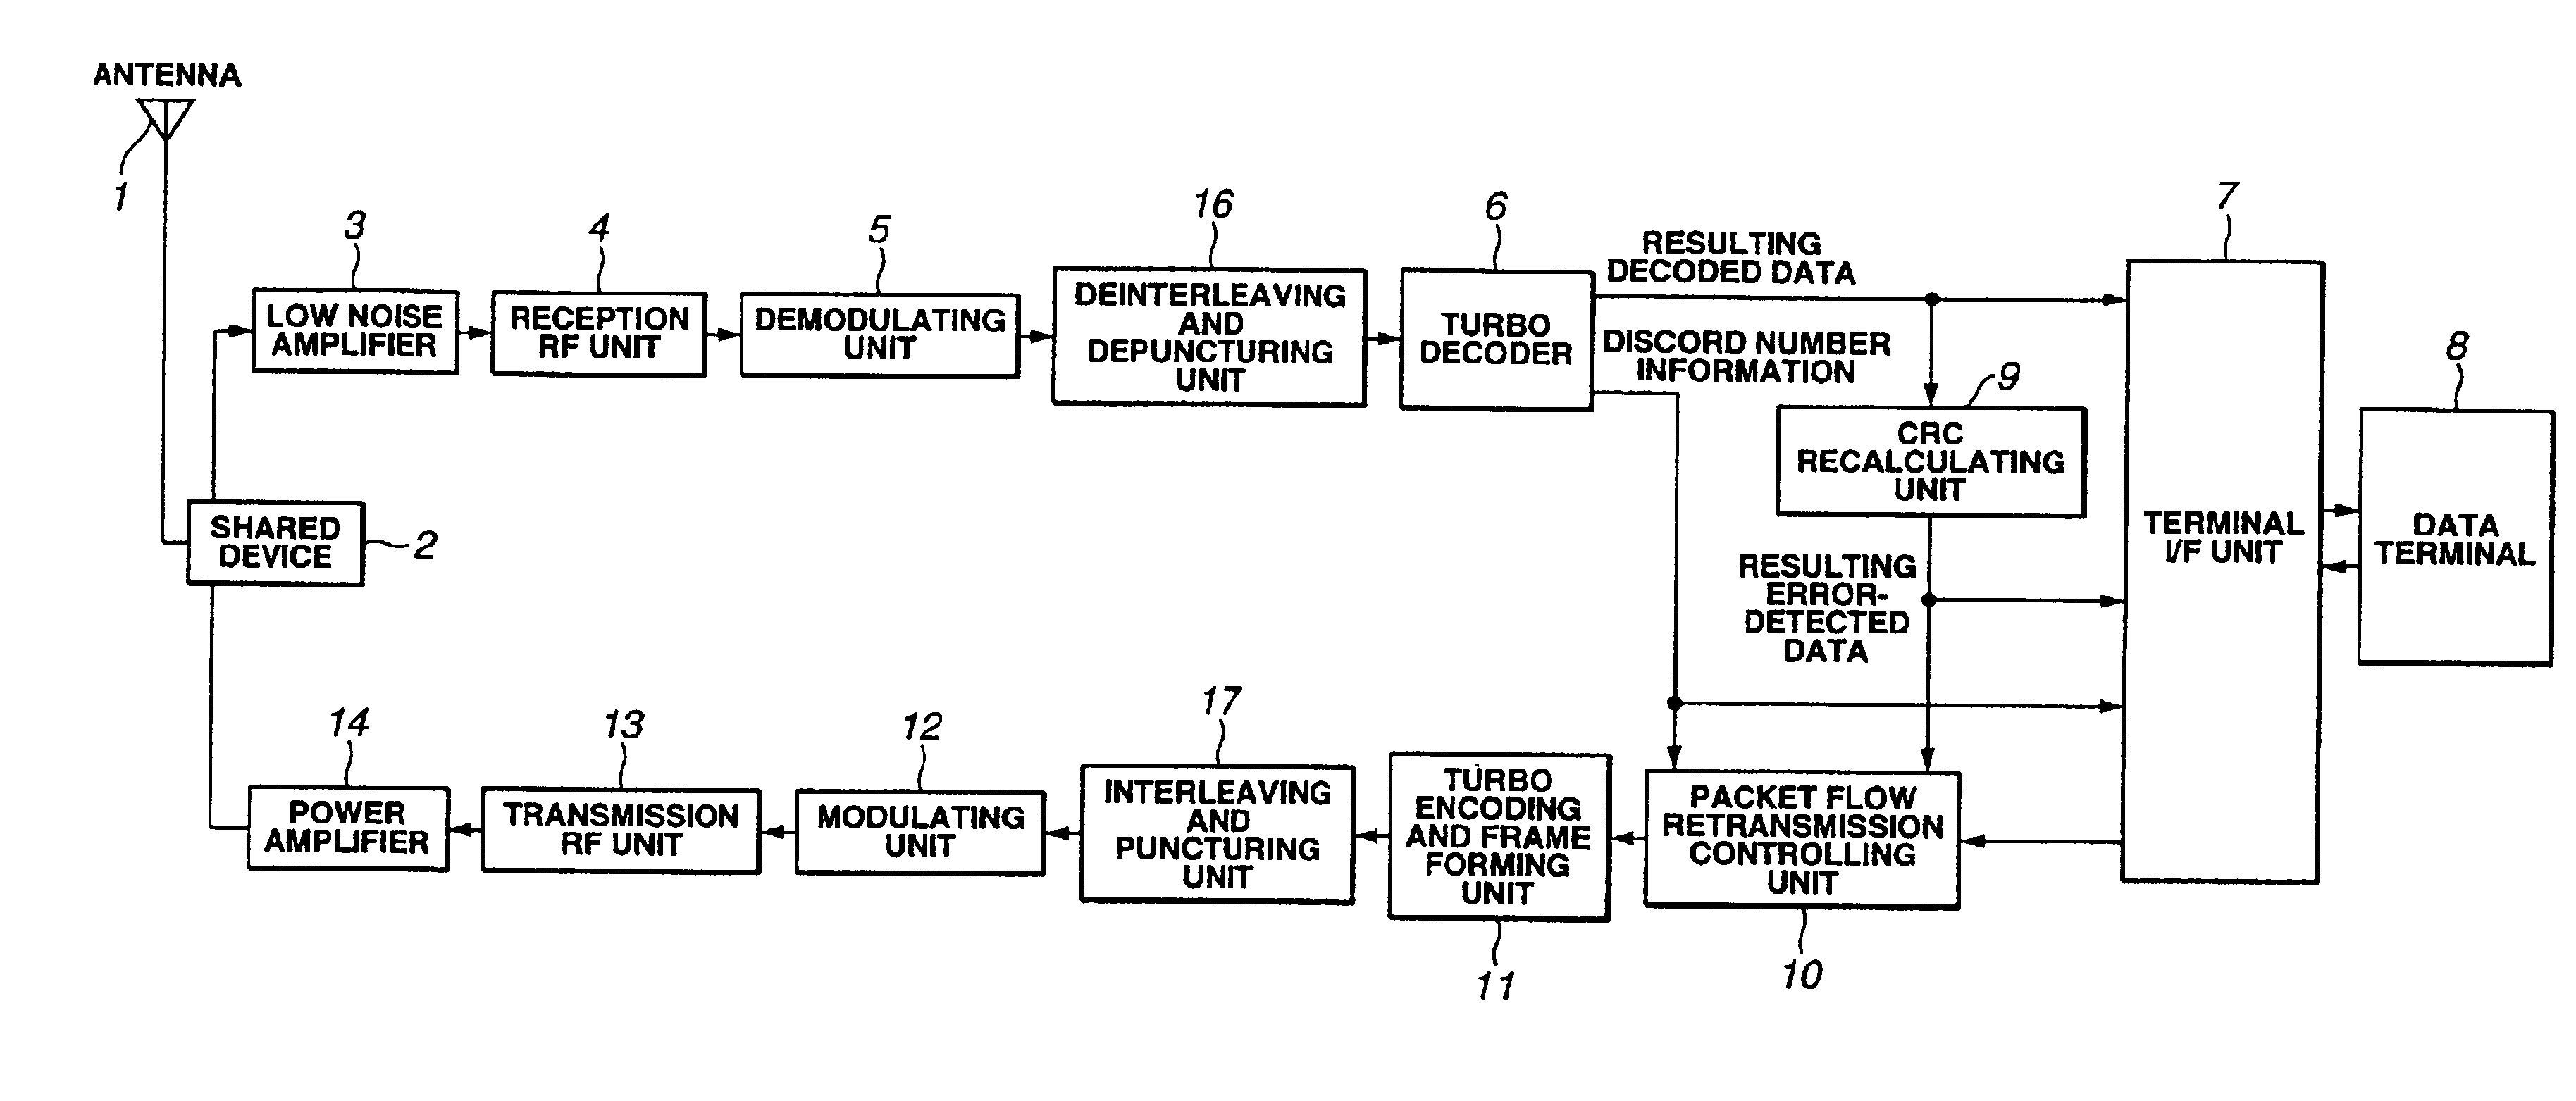 Decoding apparatus and decoding method, and data receiving apparatus and data receiving method